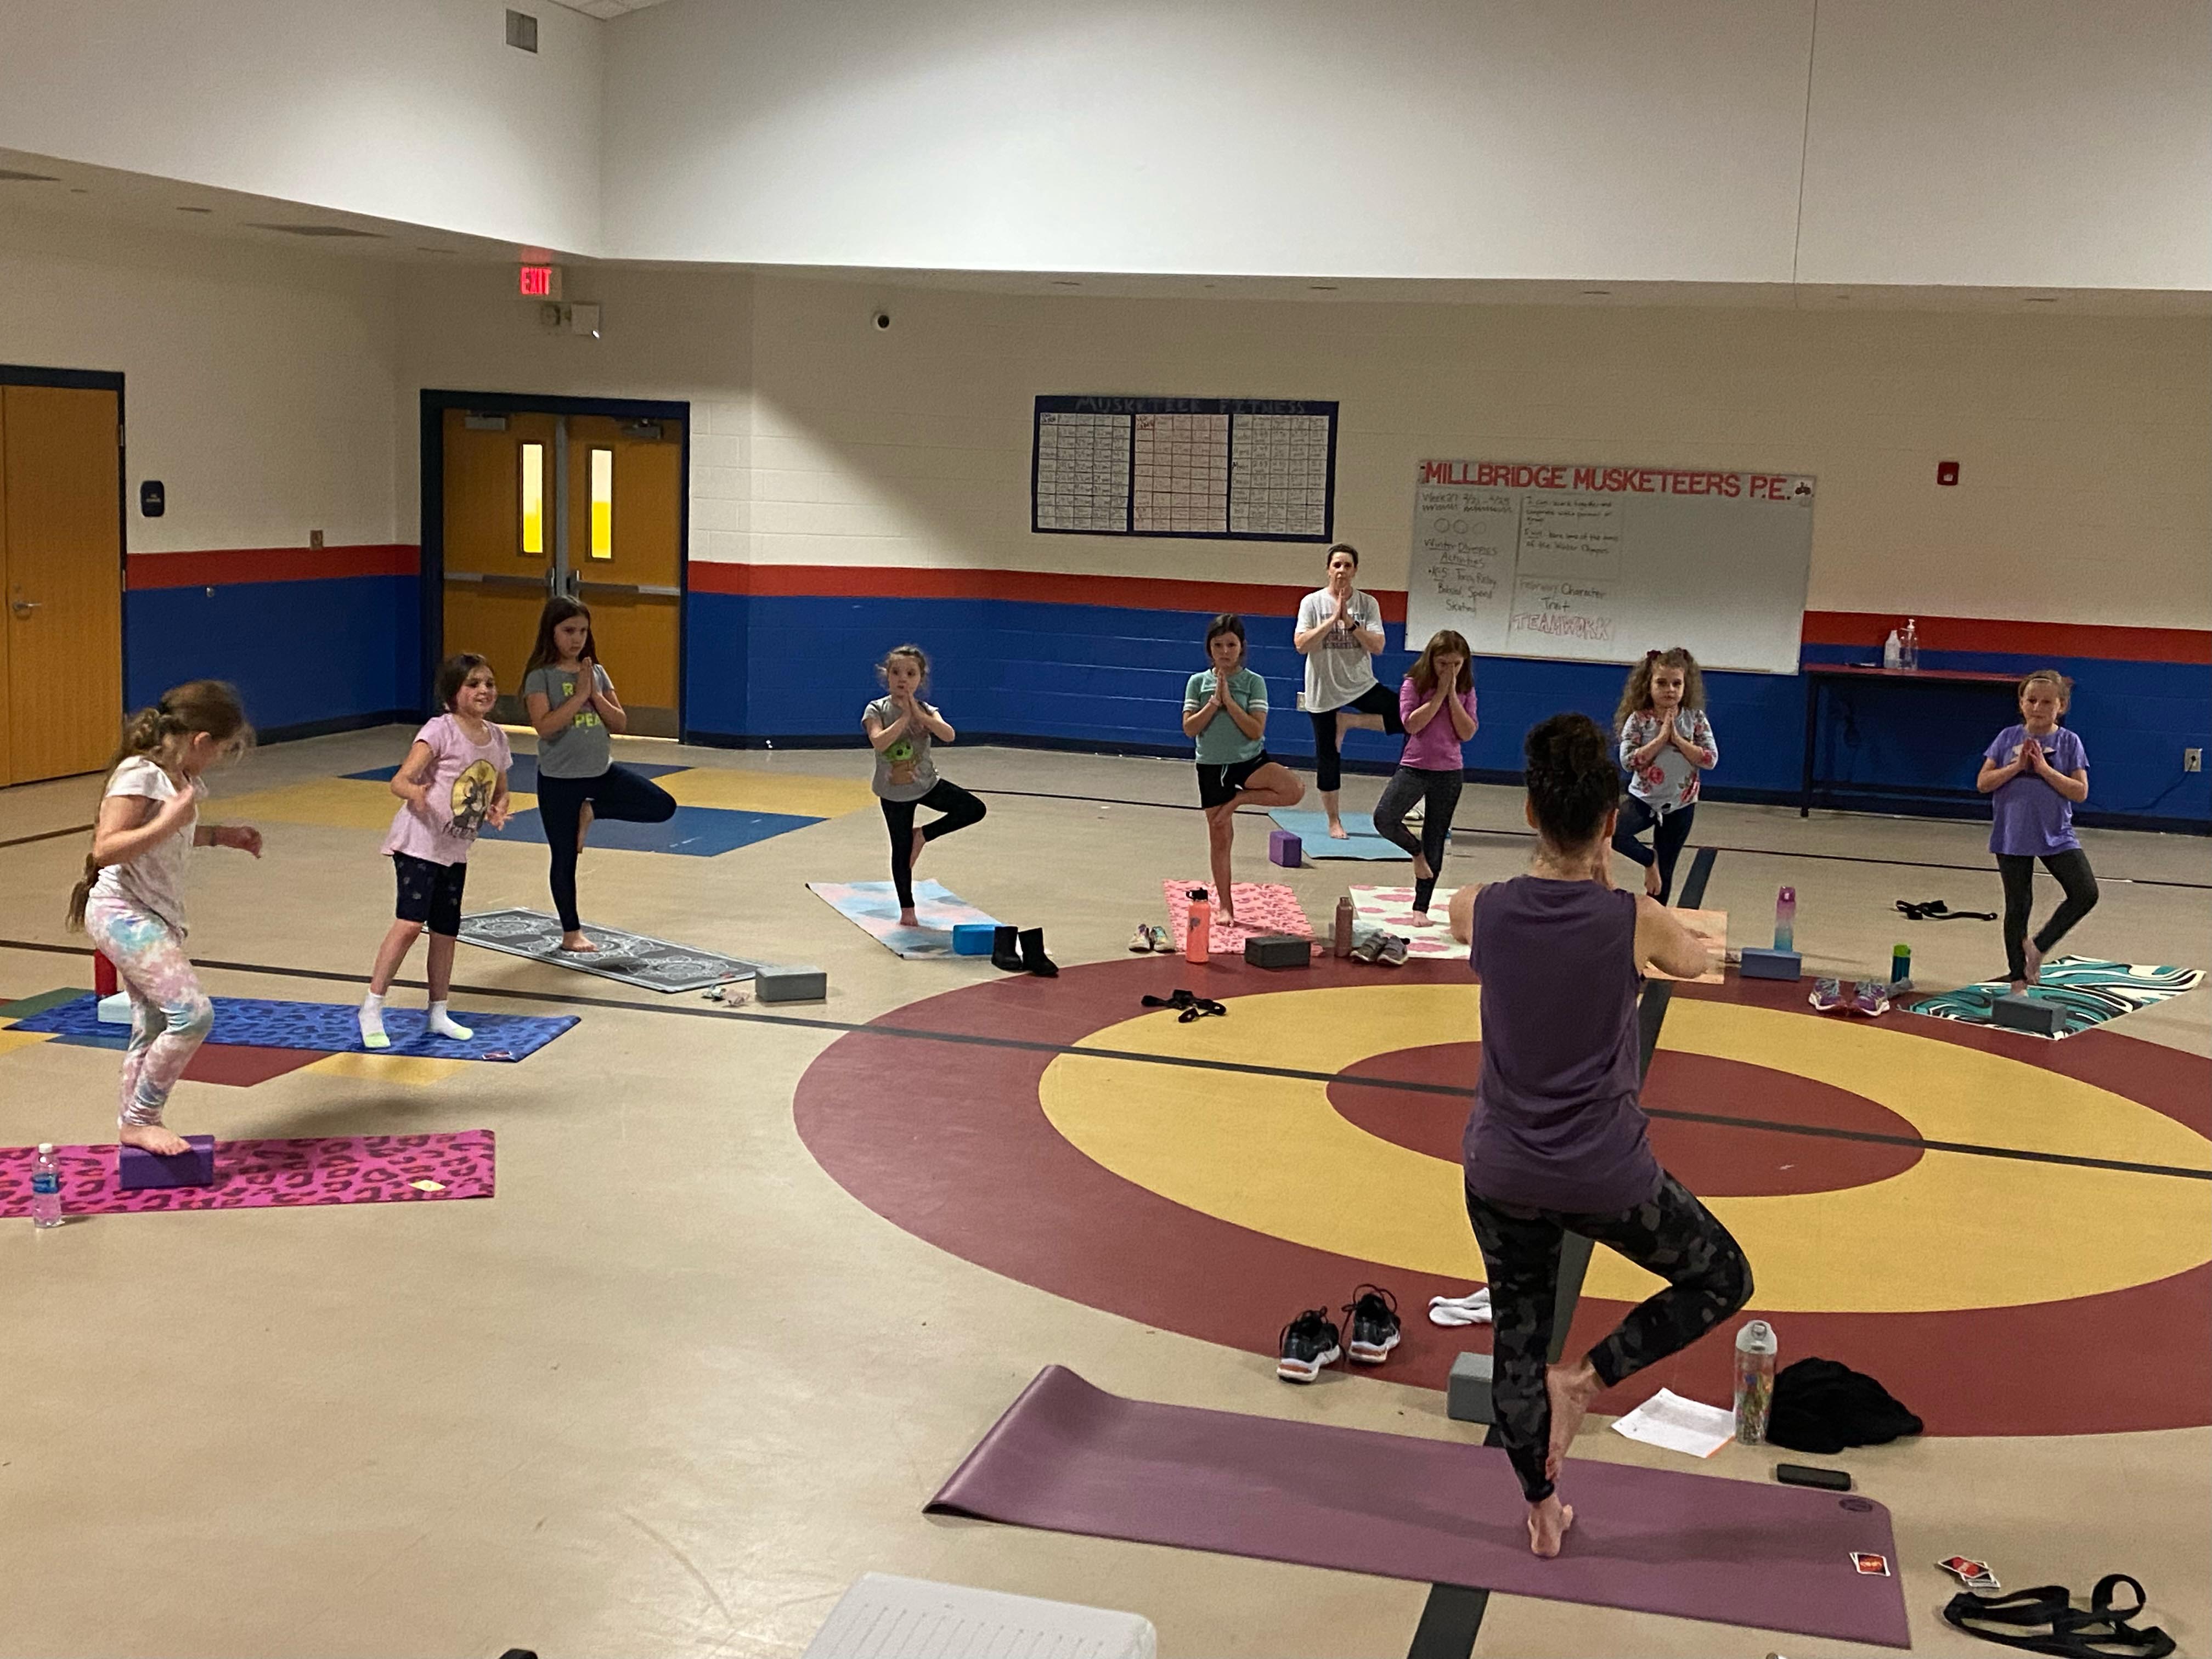 Millbridge Elementary yoga club is an outlet for students